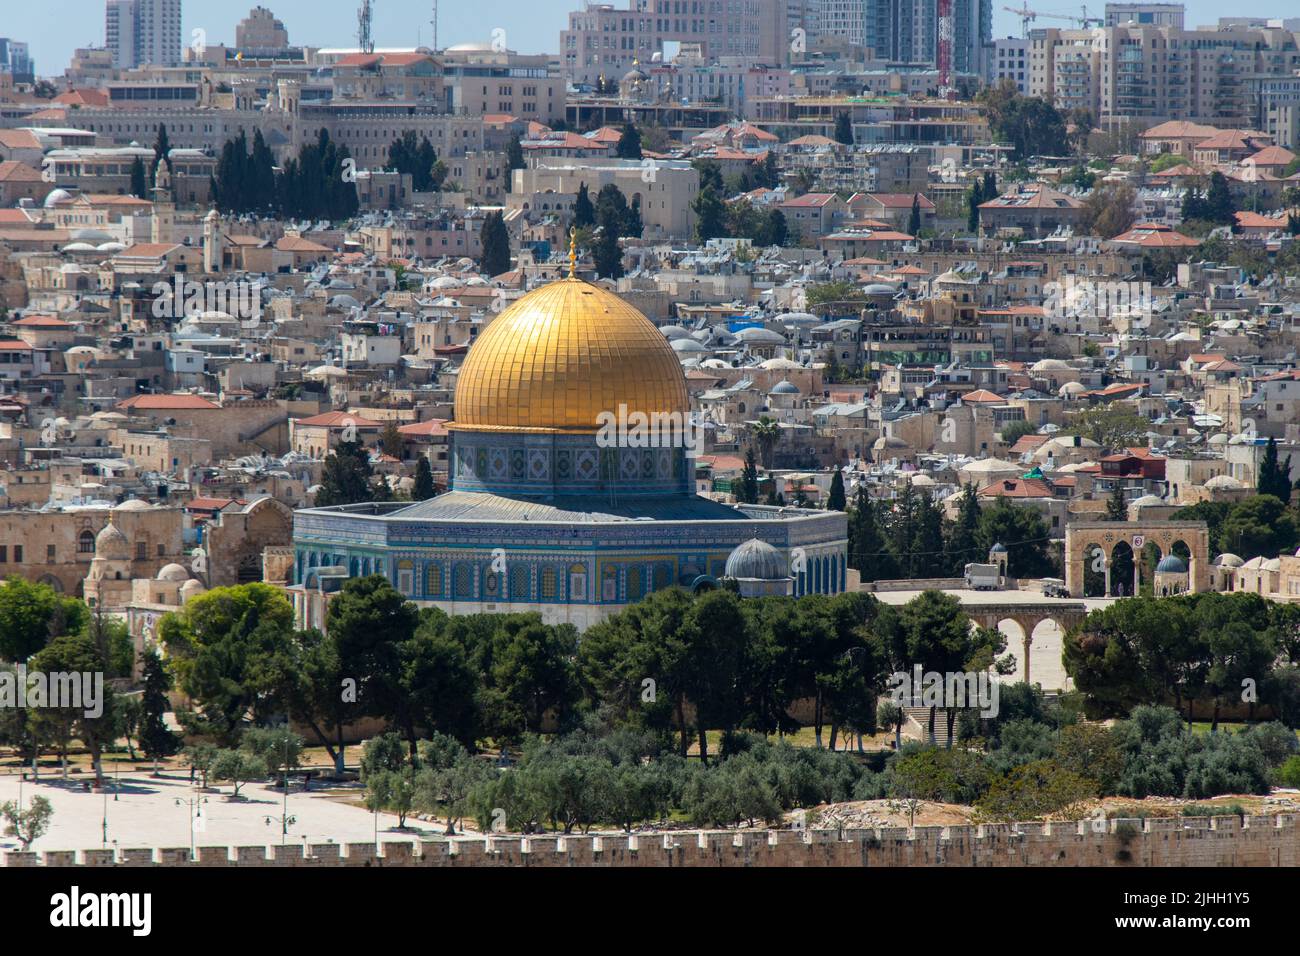 Mousque of Al-aqsa or Dome of the Rock in Old Town - Jerusalem, Israel. Stock Photo